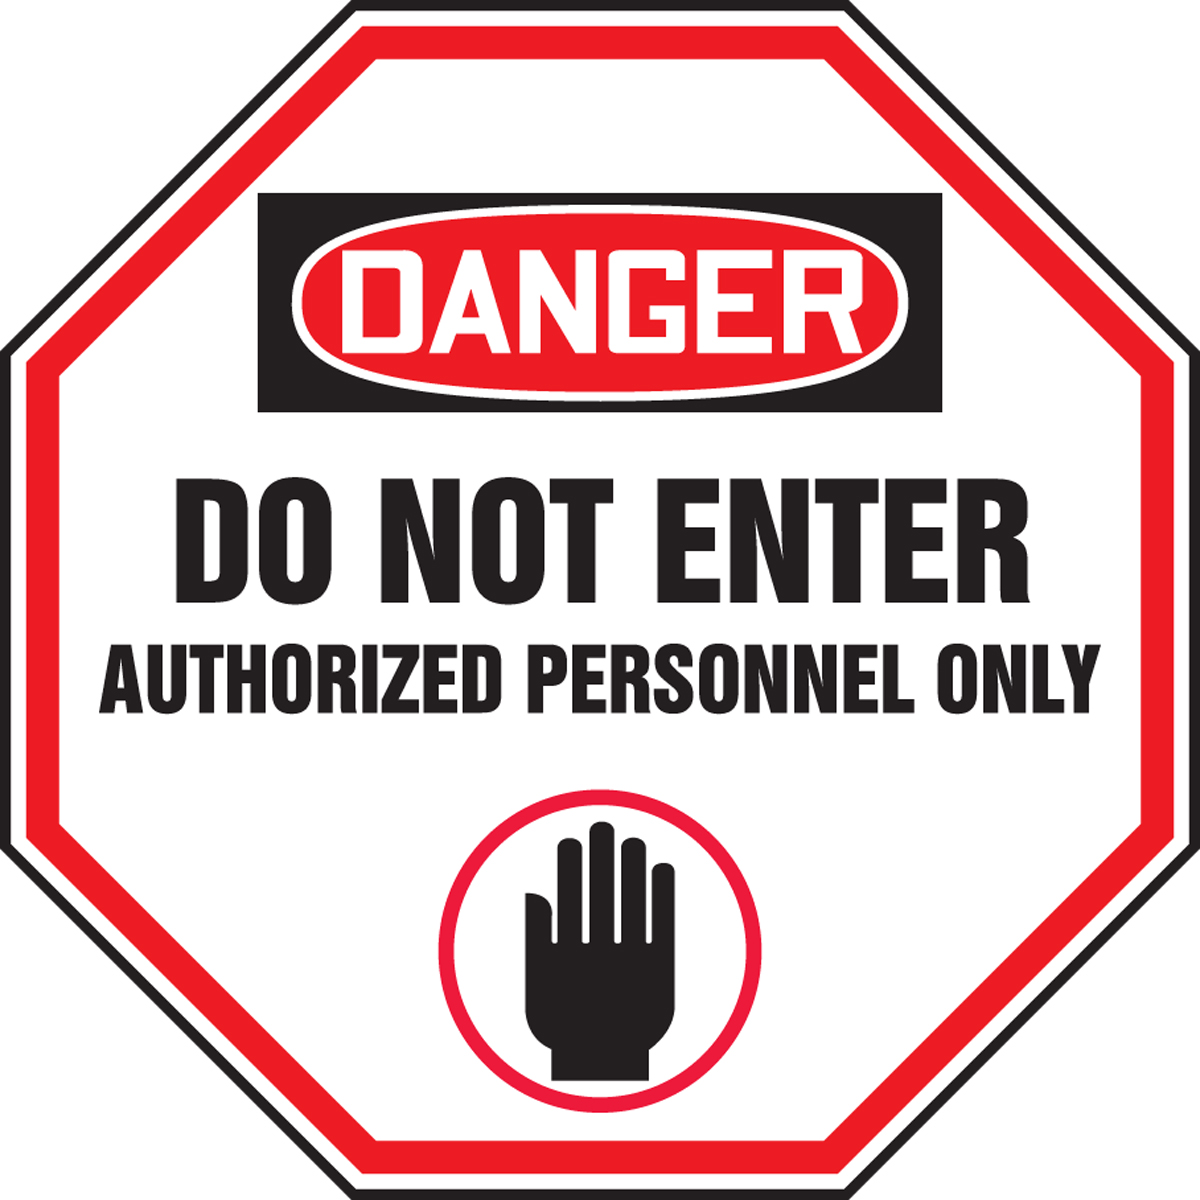 DANGER DO NOT ENTER AUTHORIZED PERSONNEL ONLY (W/GRAPHIC)